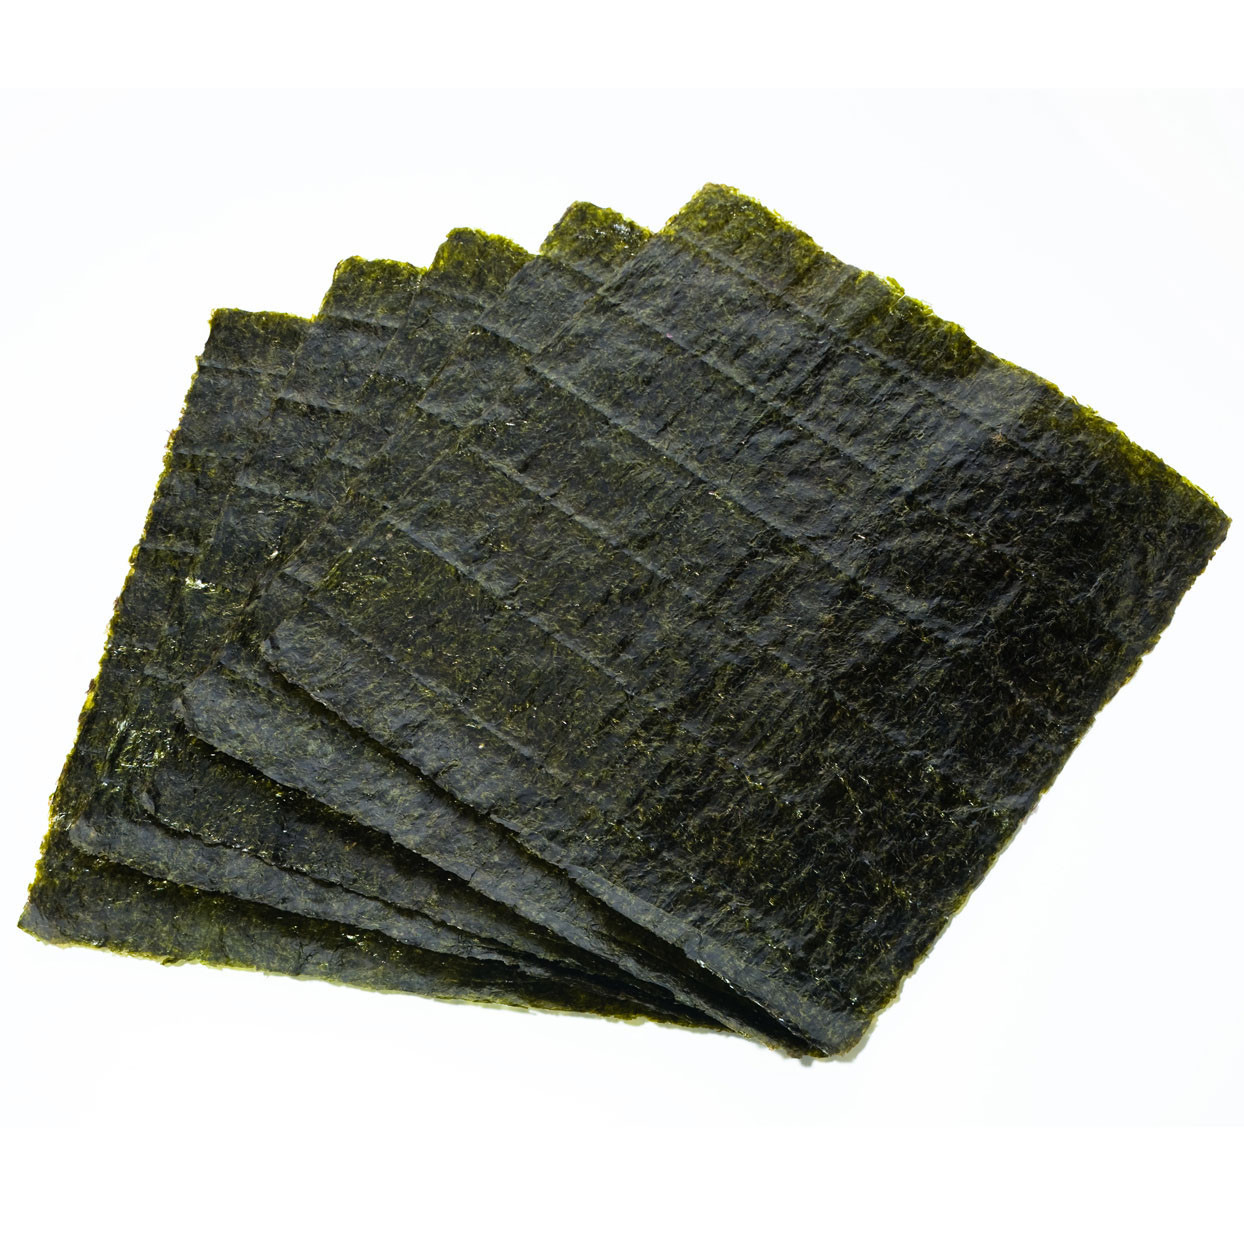 19 X 21cm Rectangular Widely Available Sushi Alga Nori For Rolling Sushi for sale